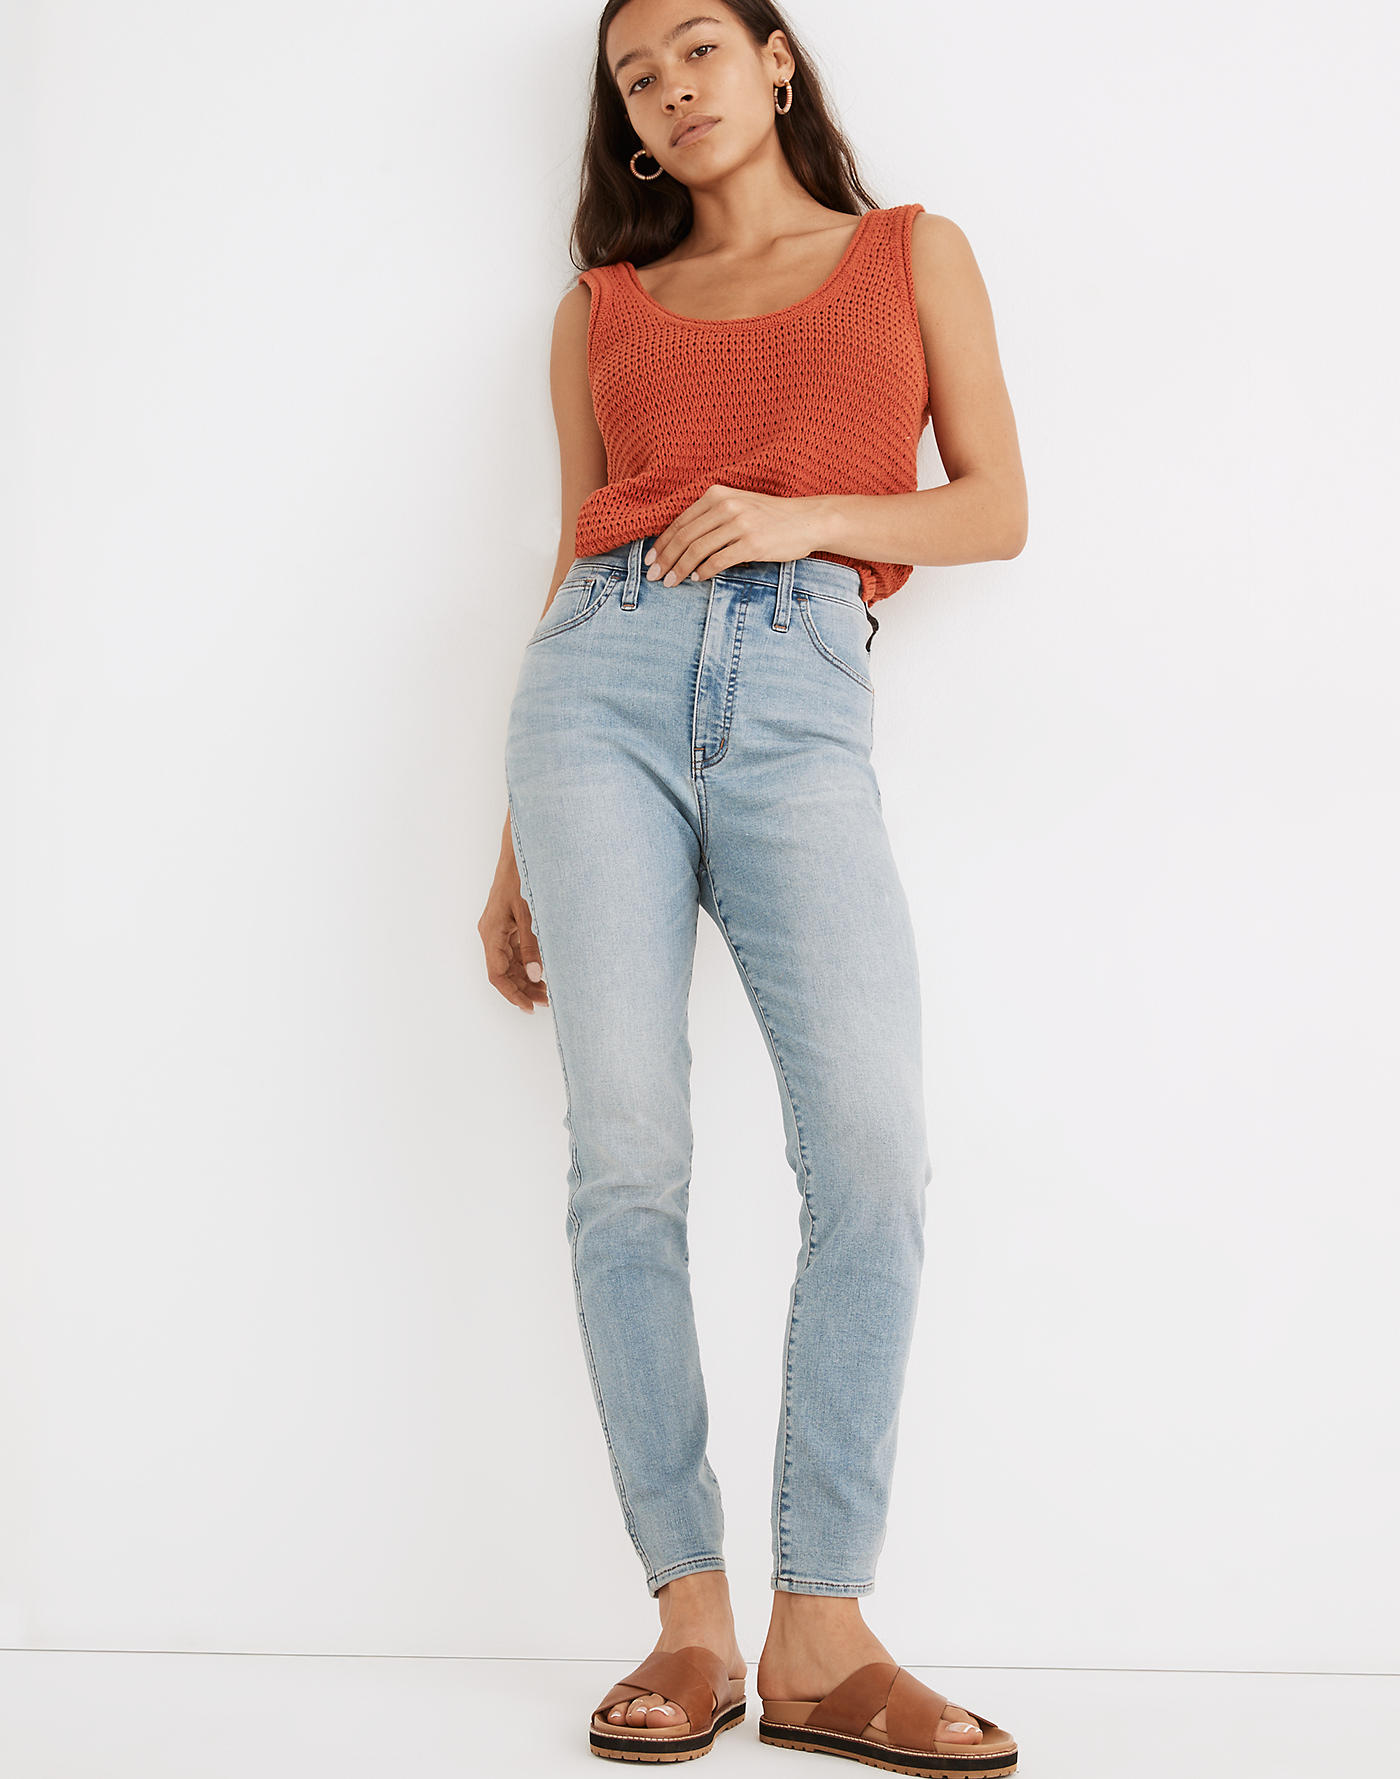 Madewell Curvy Roadtripper Authentic Jeans in Cadwell Wash